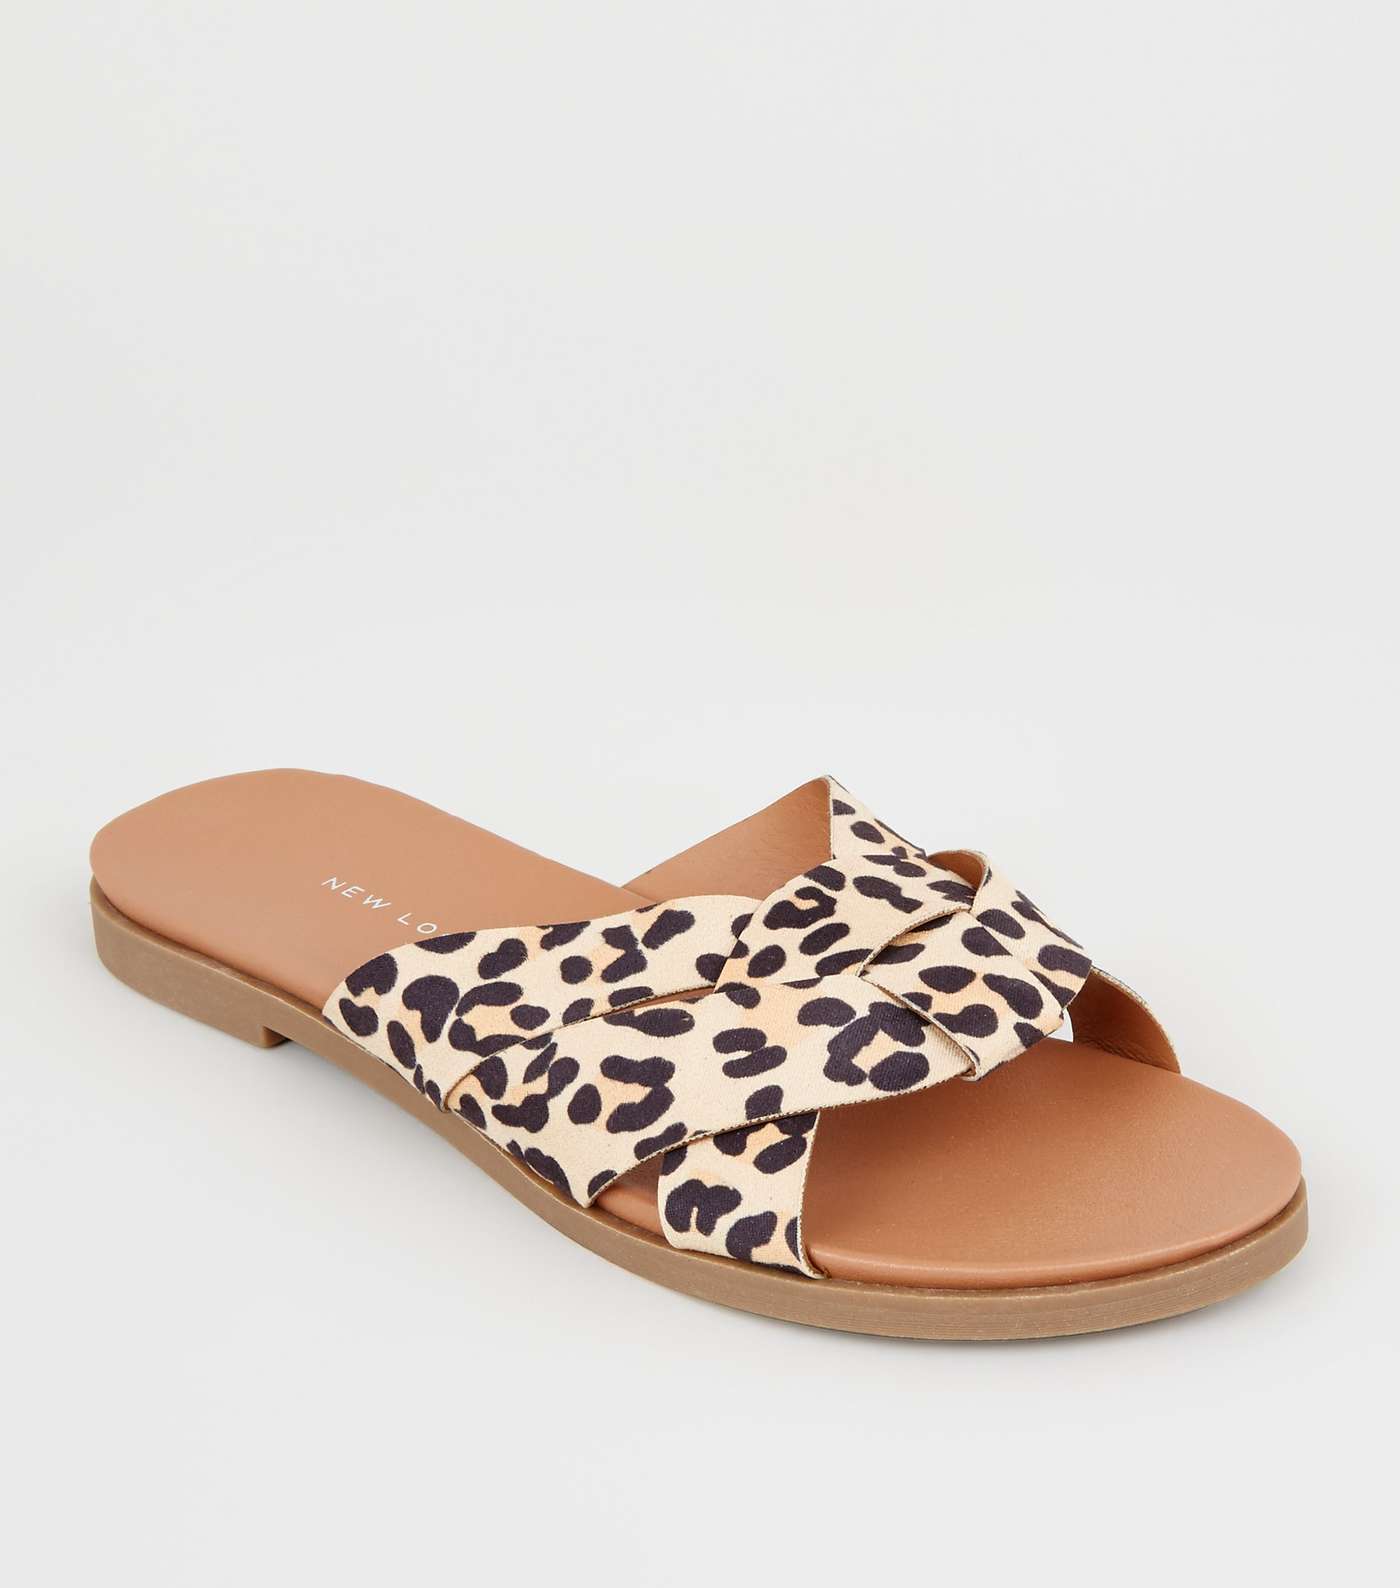 Wide Fit Stone Leopard Print Woven Footbed Sliders